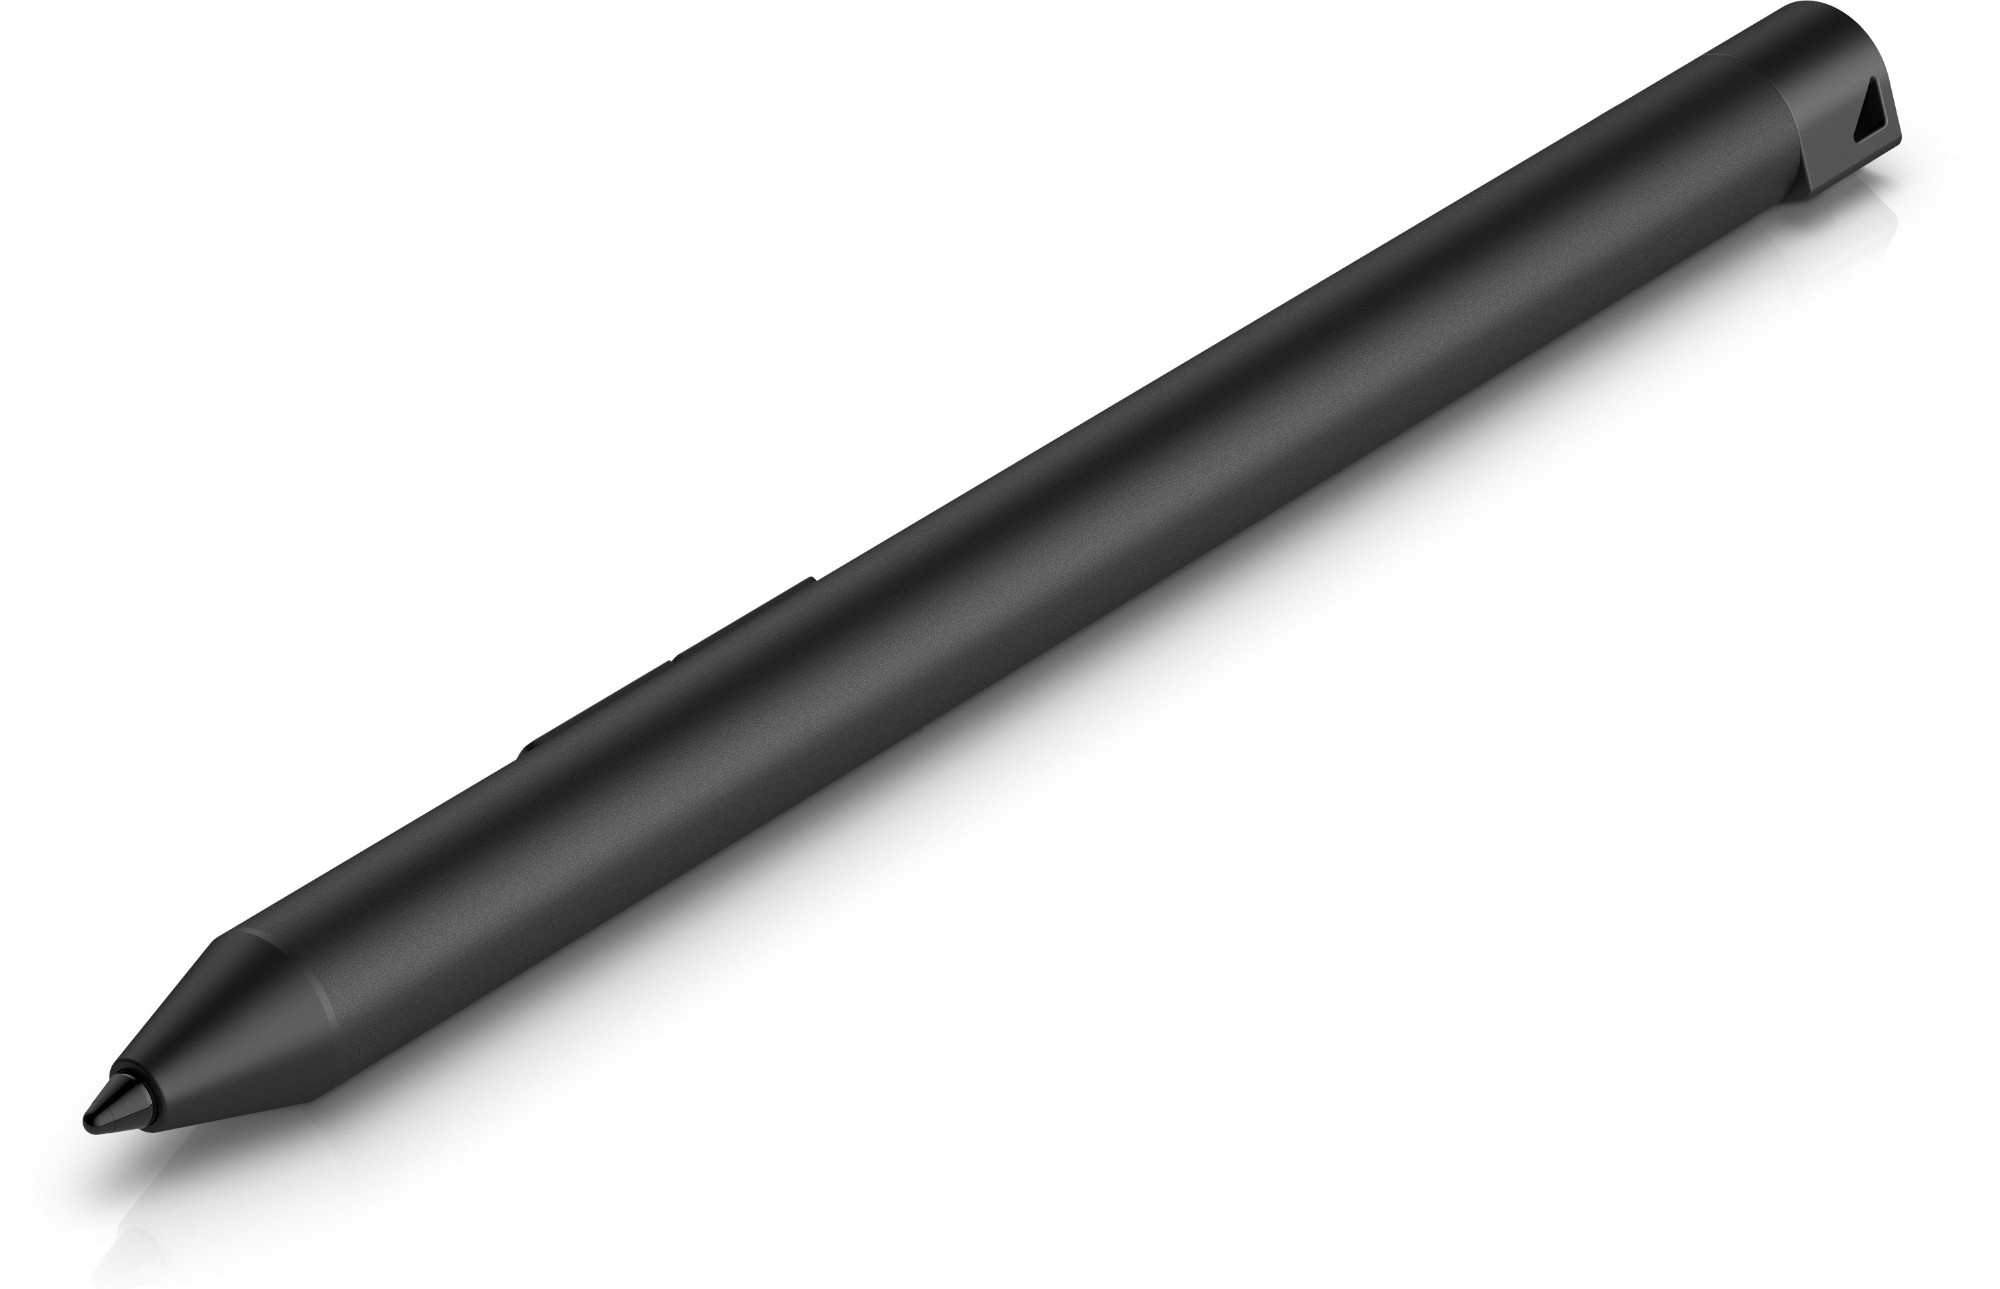  A black stylus pen with a silver tip and a black button on its side.